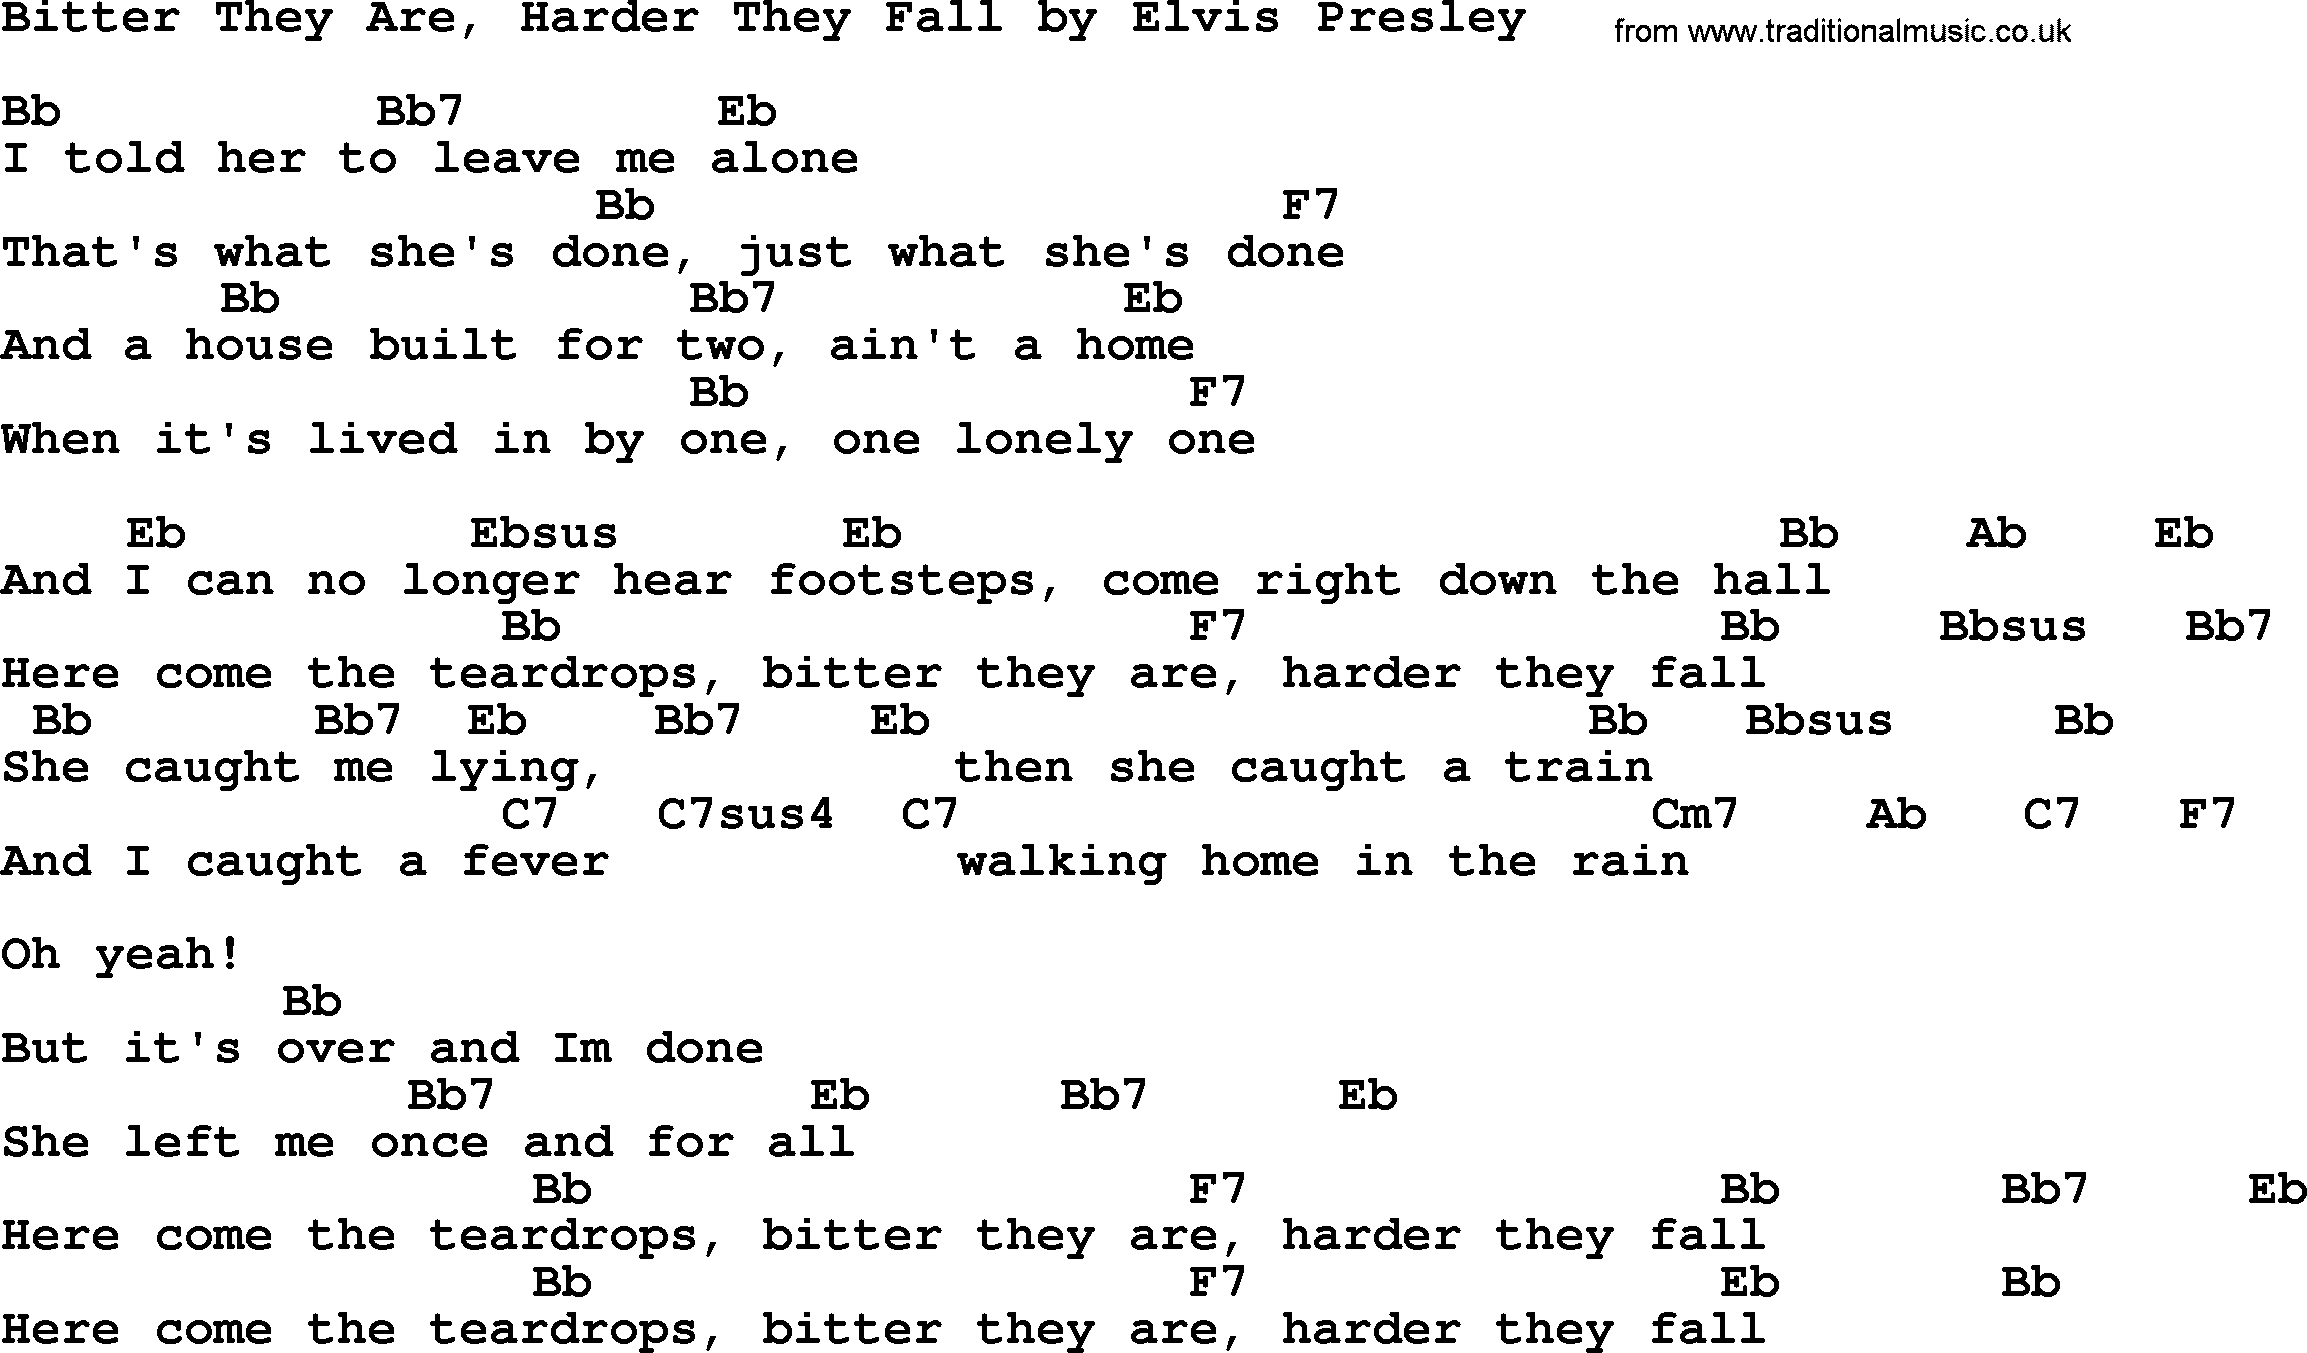 Elvis Presley song: Bitter They Are, Harder They Fall, lyrics and chords